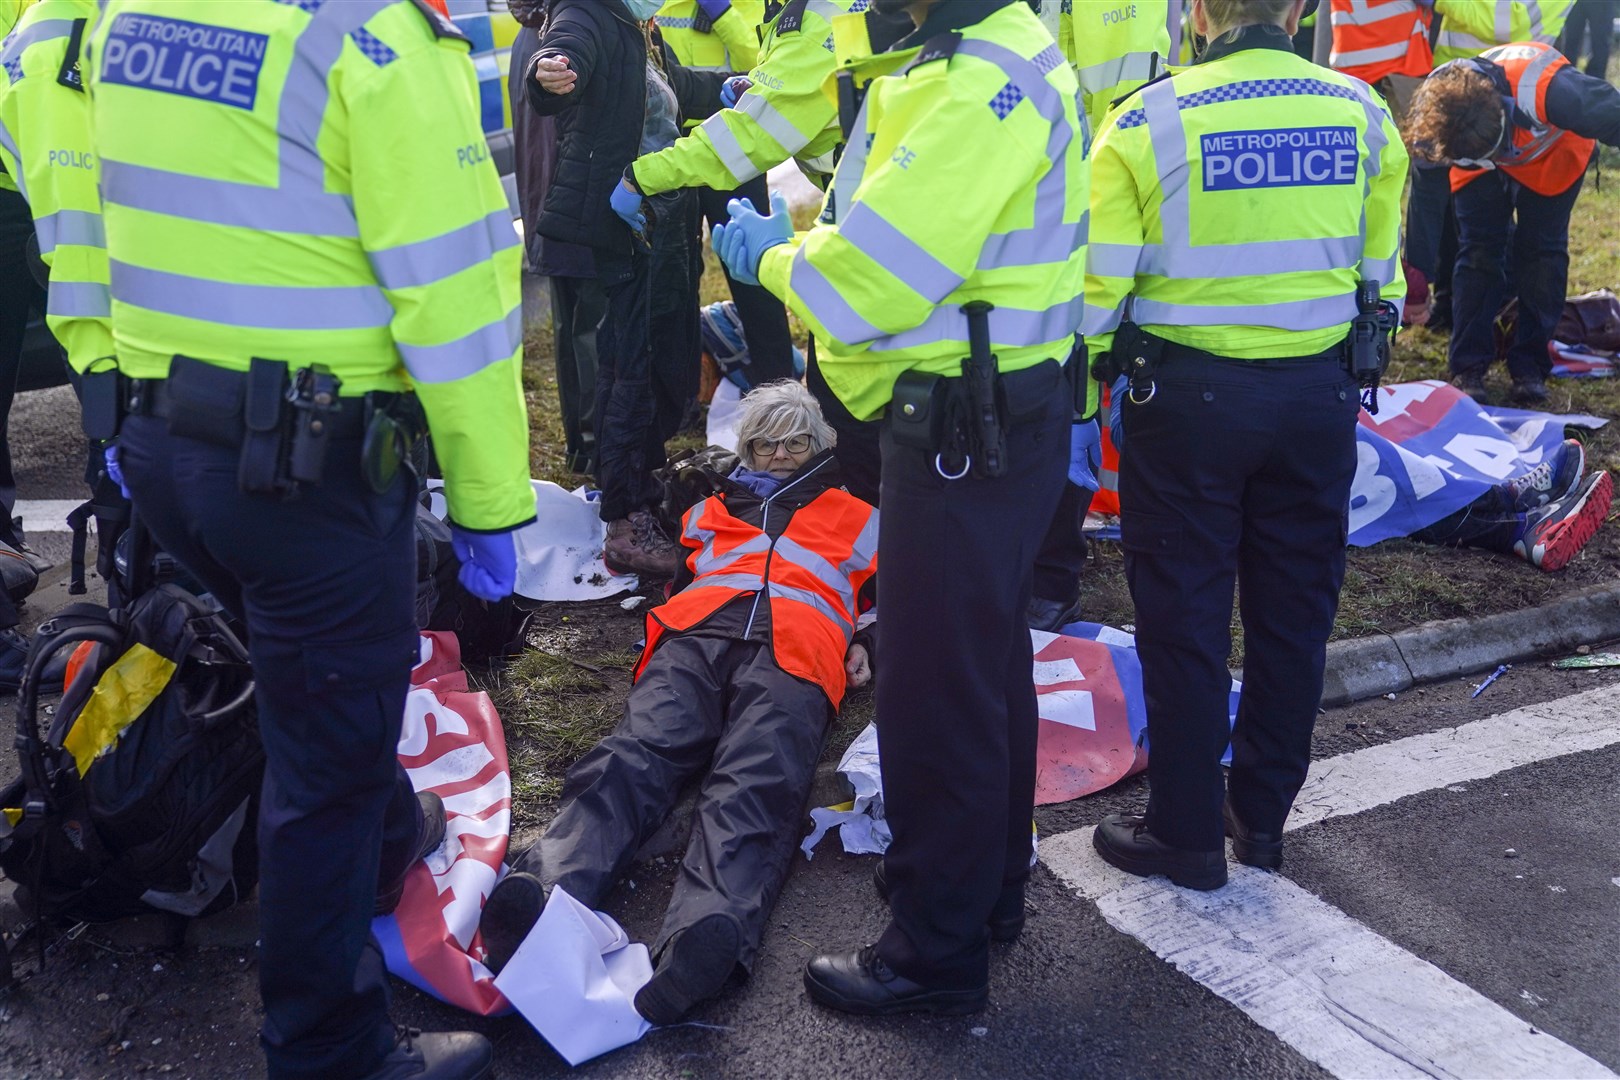 Police officers detain a protester from Insulate Britain occupying a roundabout leading from the M25 motorway to Heathrow Airport in London, earlier this week (Steve Parsons/PA)